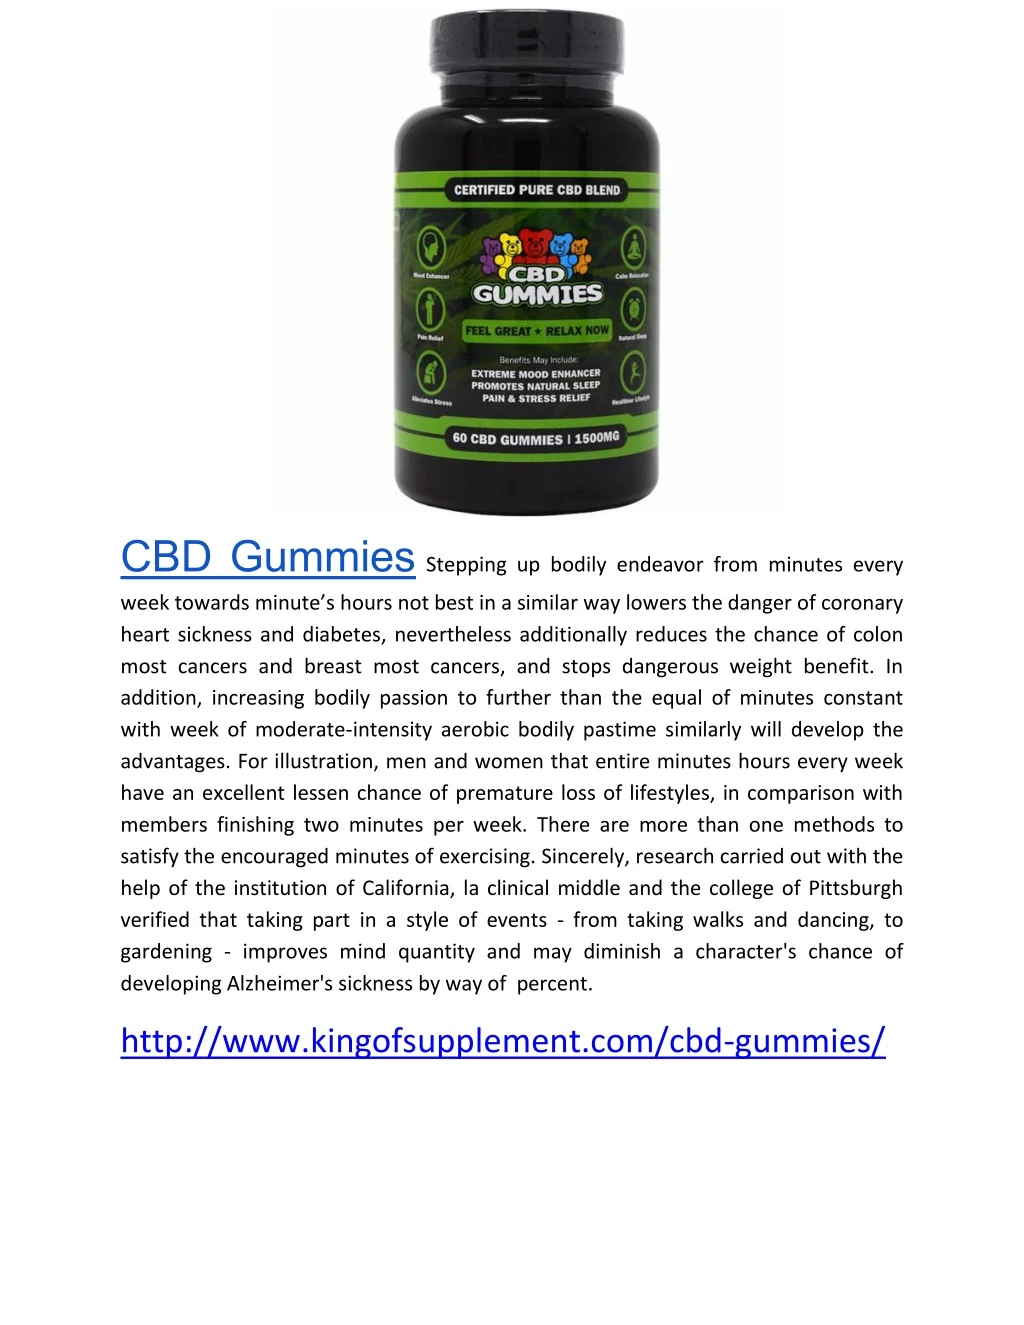 cbd gummies stepping up bodily endeavor from